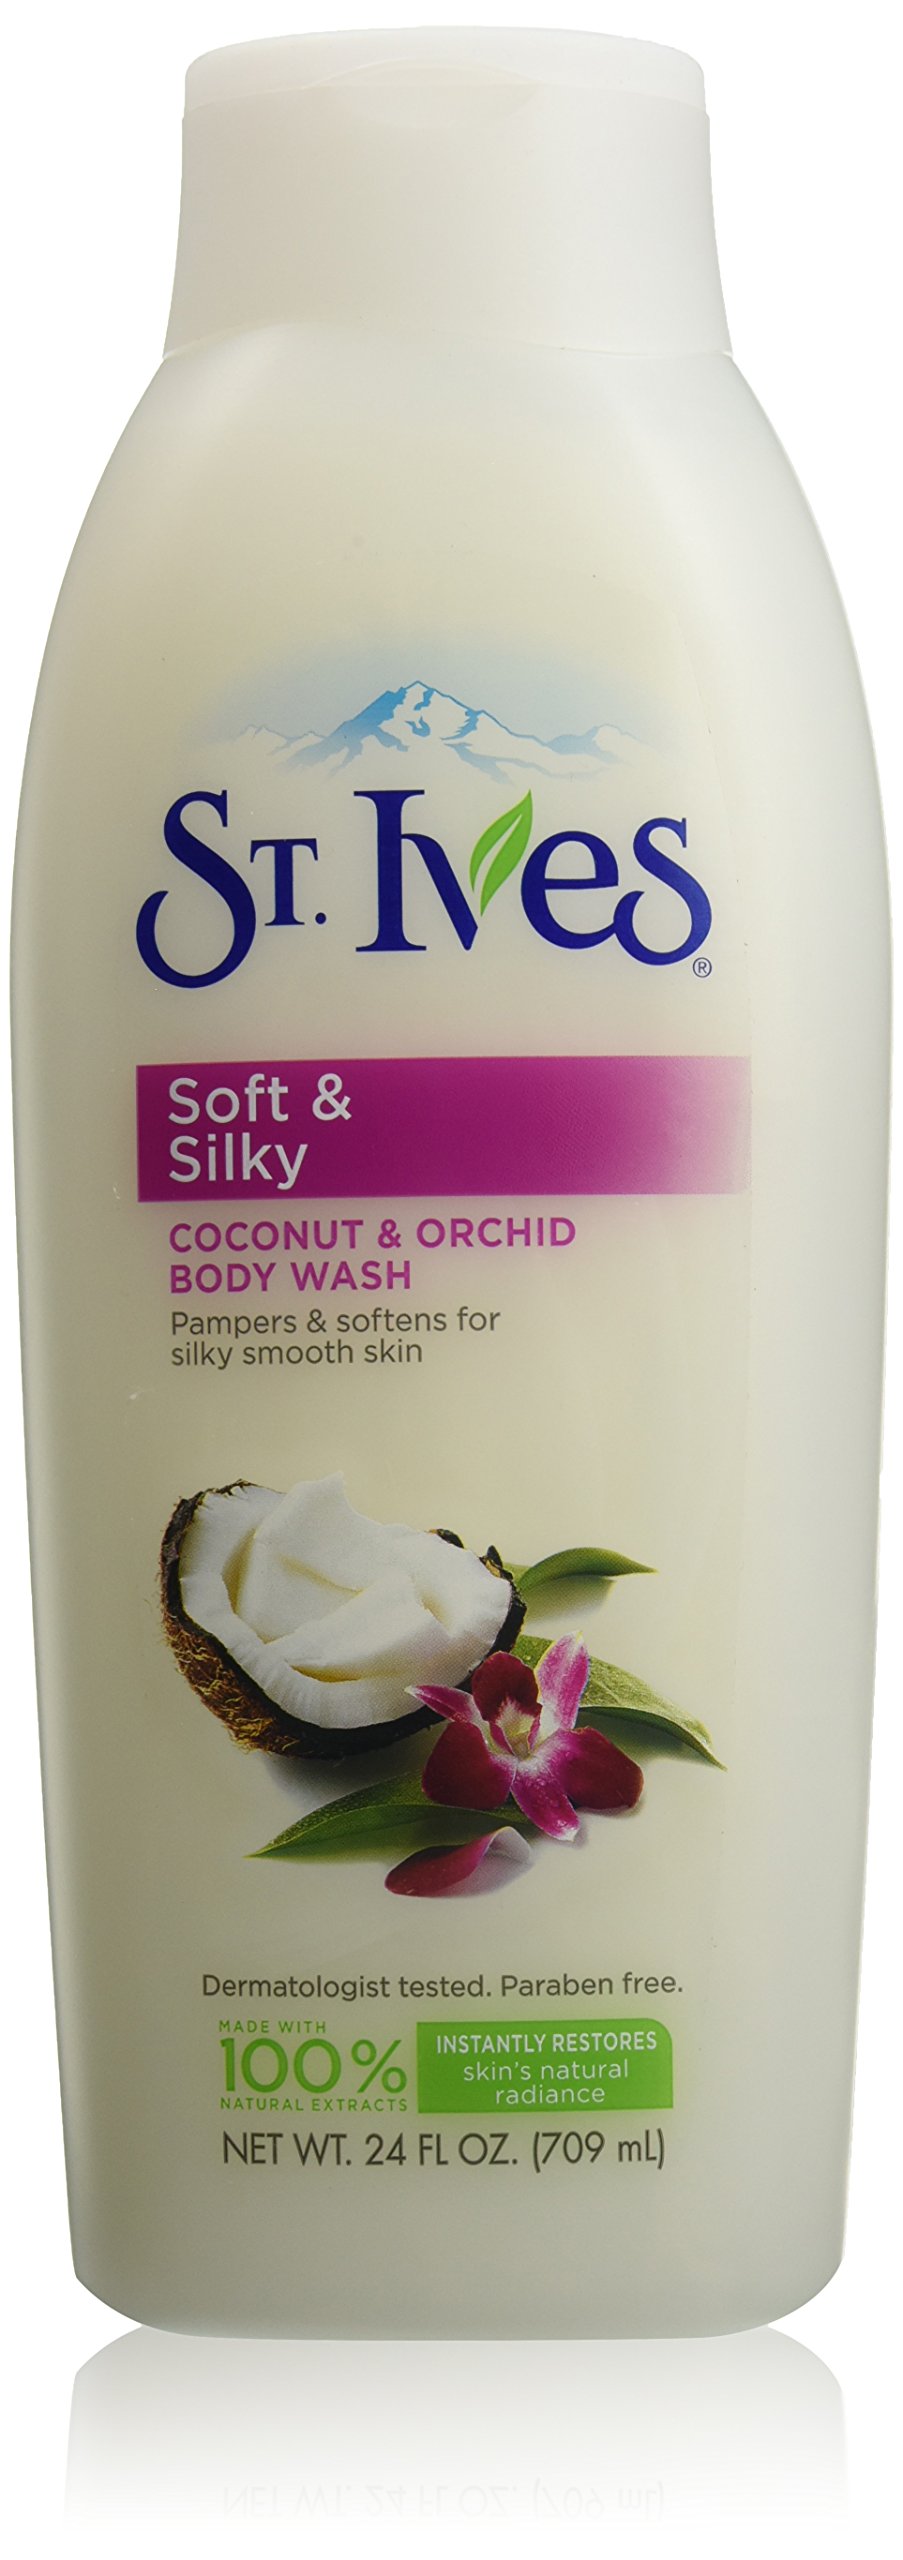 St. Ives Soft and Silky Tripple Butters Body Wash, Indulgent Coconut Milk, 24 Fl Oz